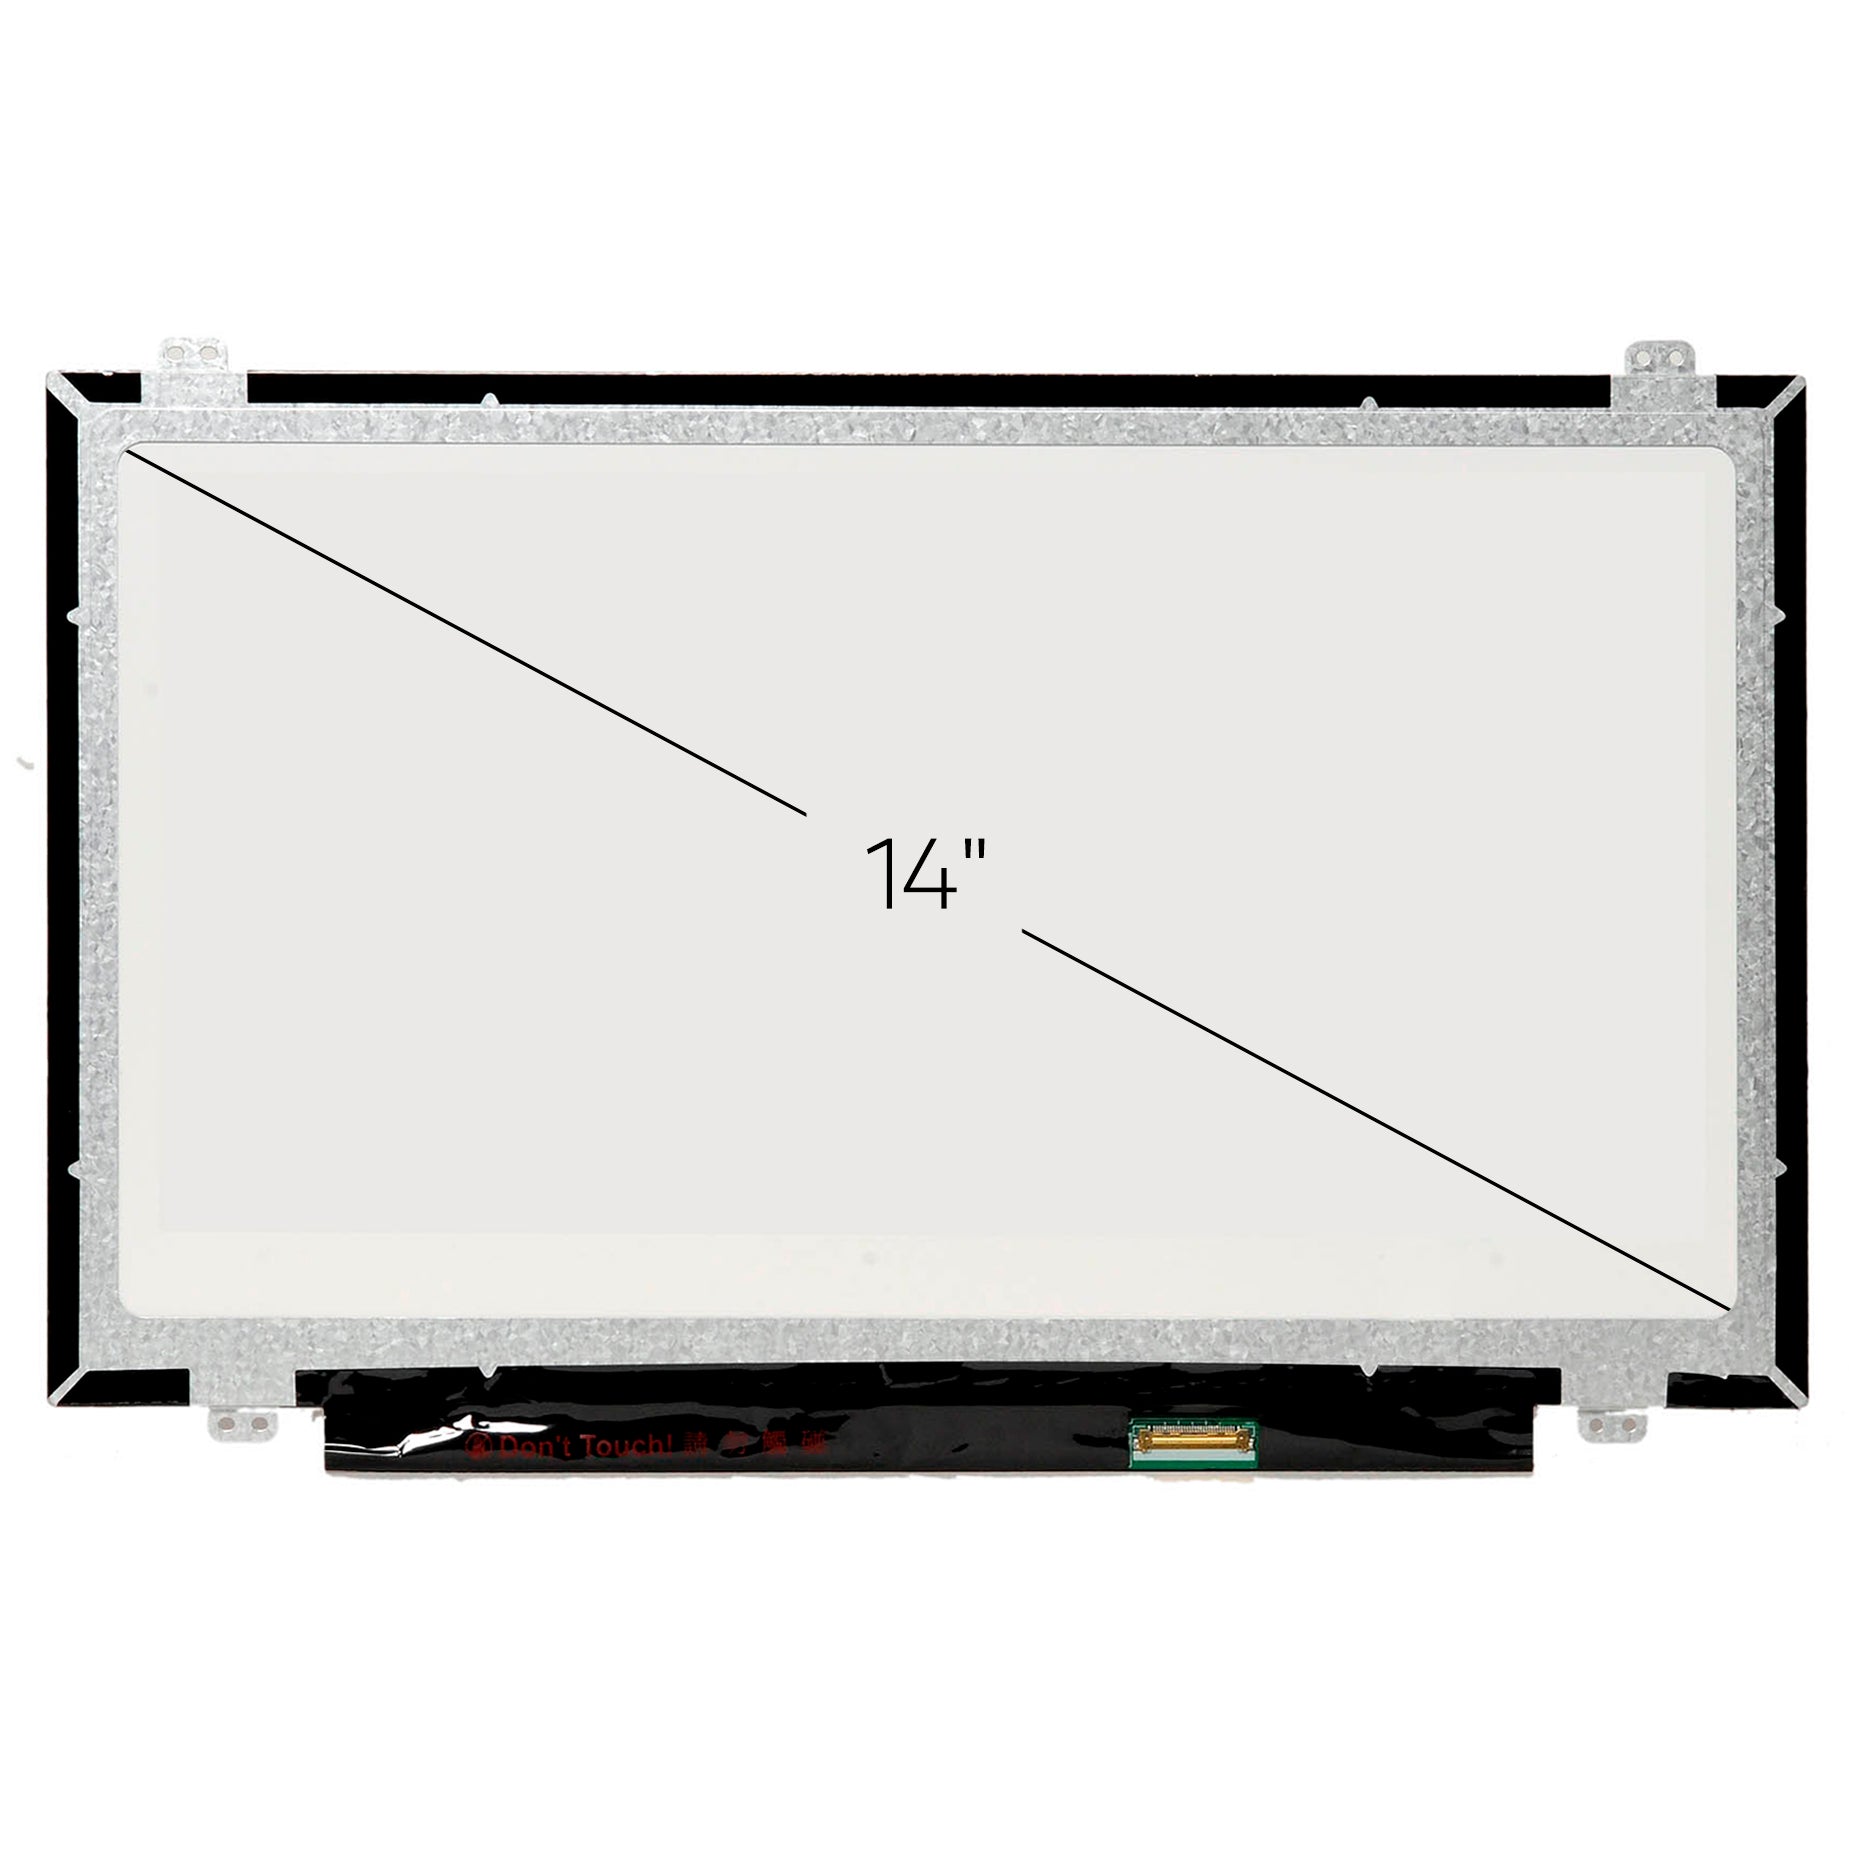 Screen Replacement for Dell Inspiron 5458 P64G001 HD 1366x768 Glossy LCD LED Display